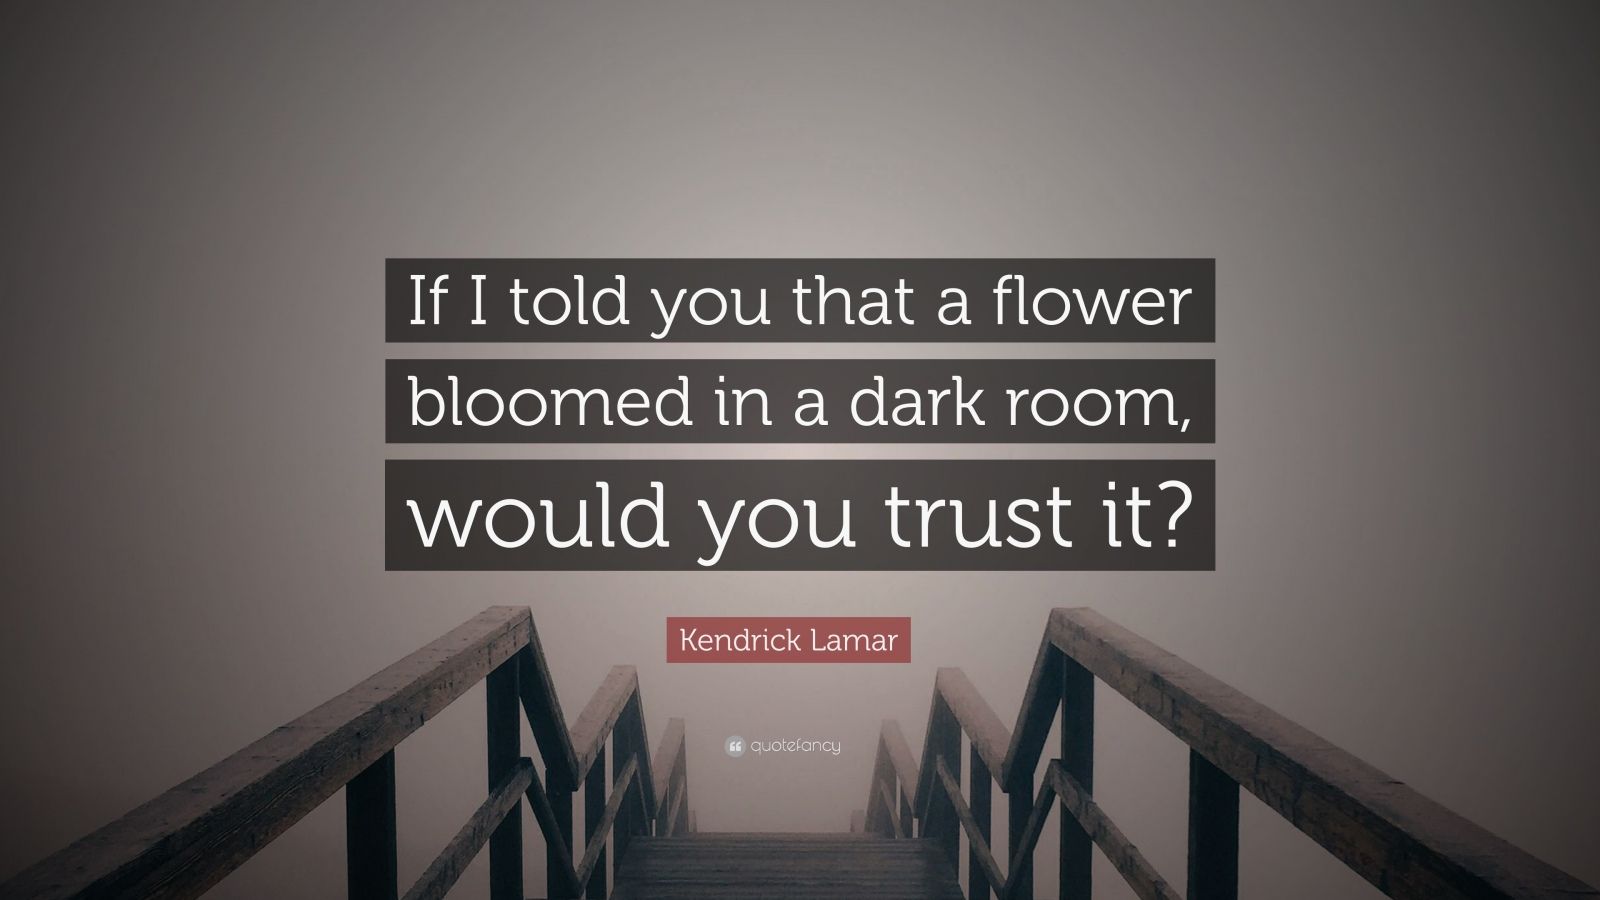 Kendrick Lamar Quote: “If I told you that a flower bloomed in a dark room, would you trust it?”